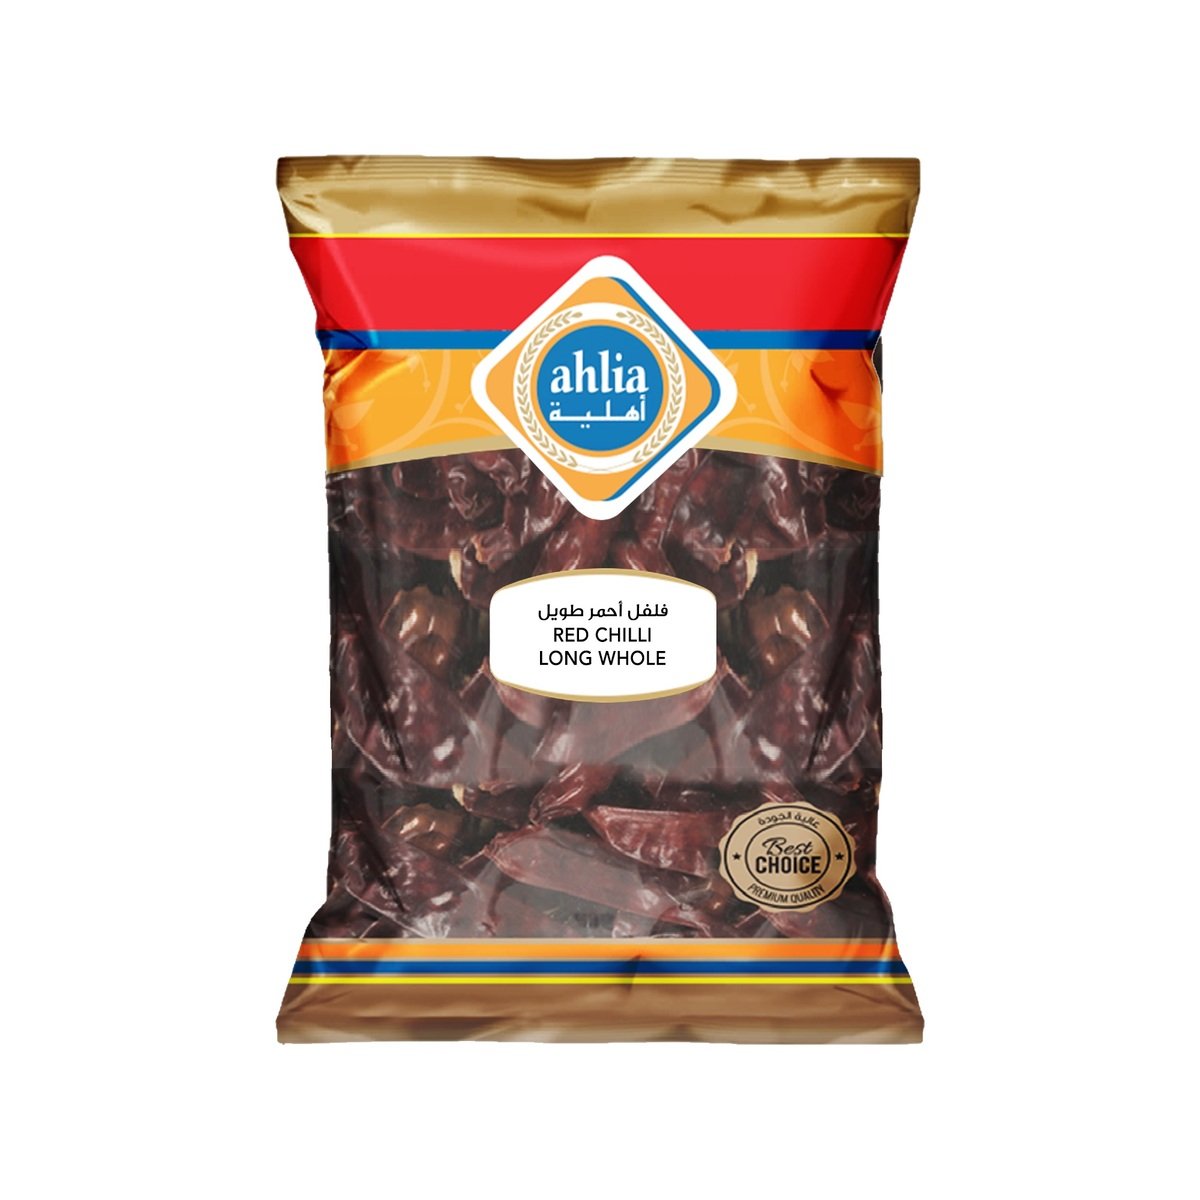 Ahlia Red Chilli Long Whole 100g